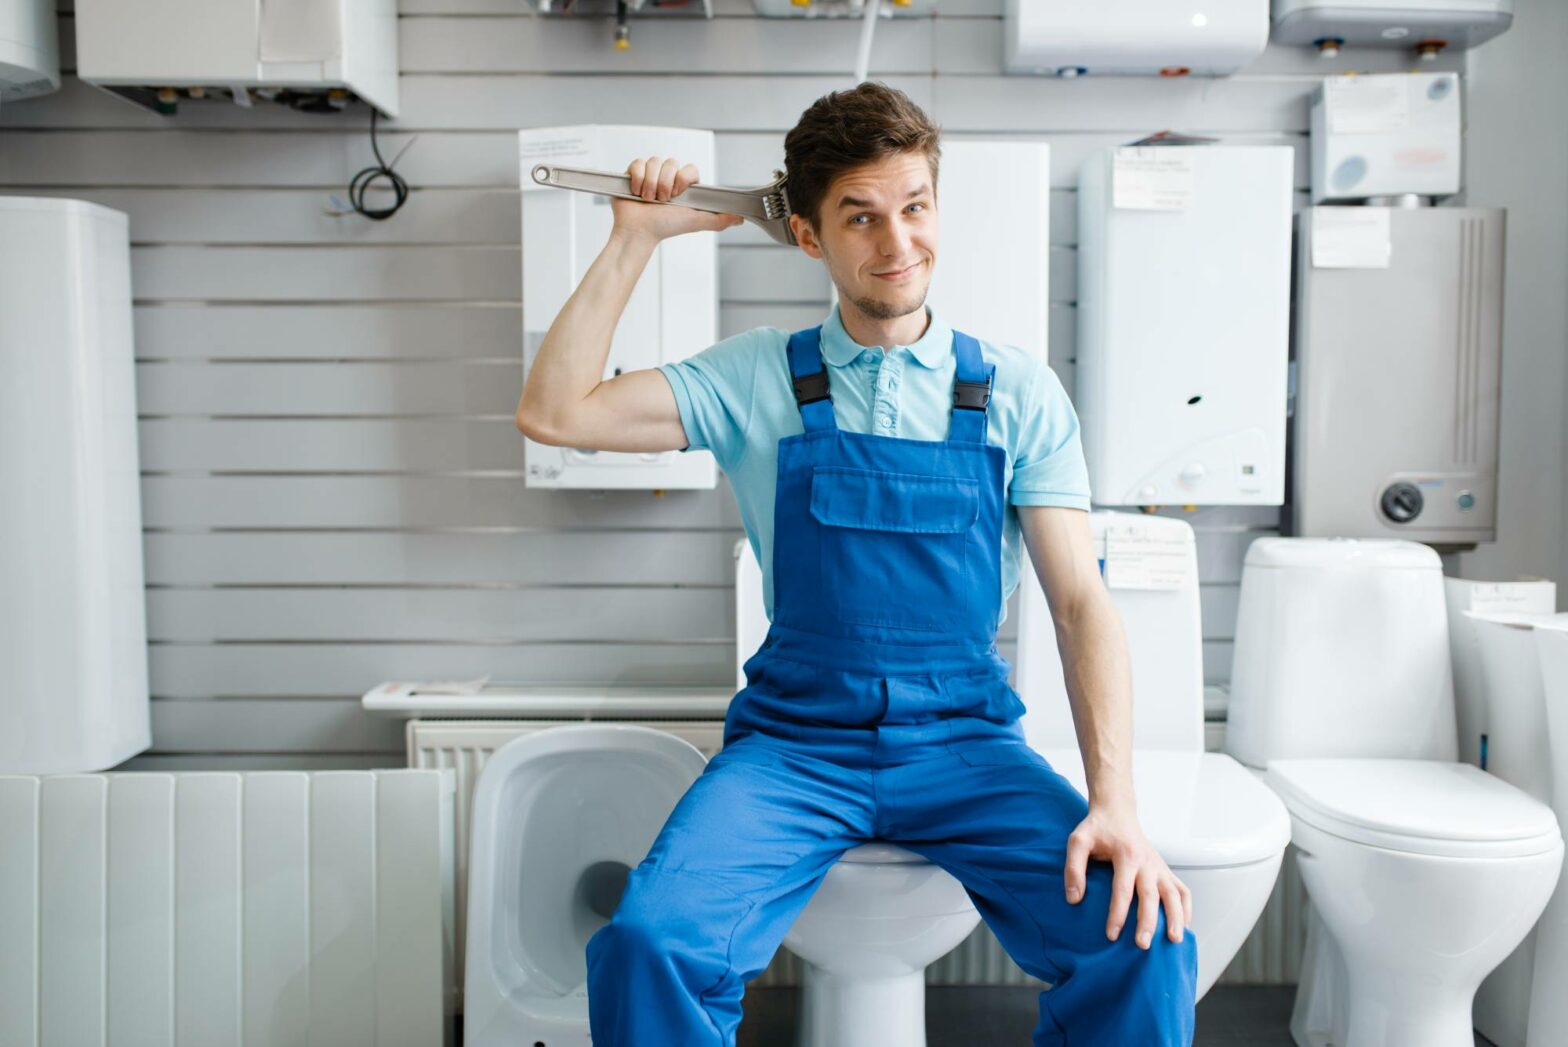 How to Start a Plumbing Business: 11 Steps to Success